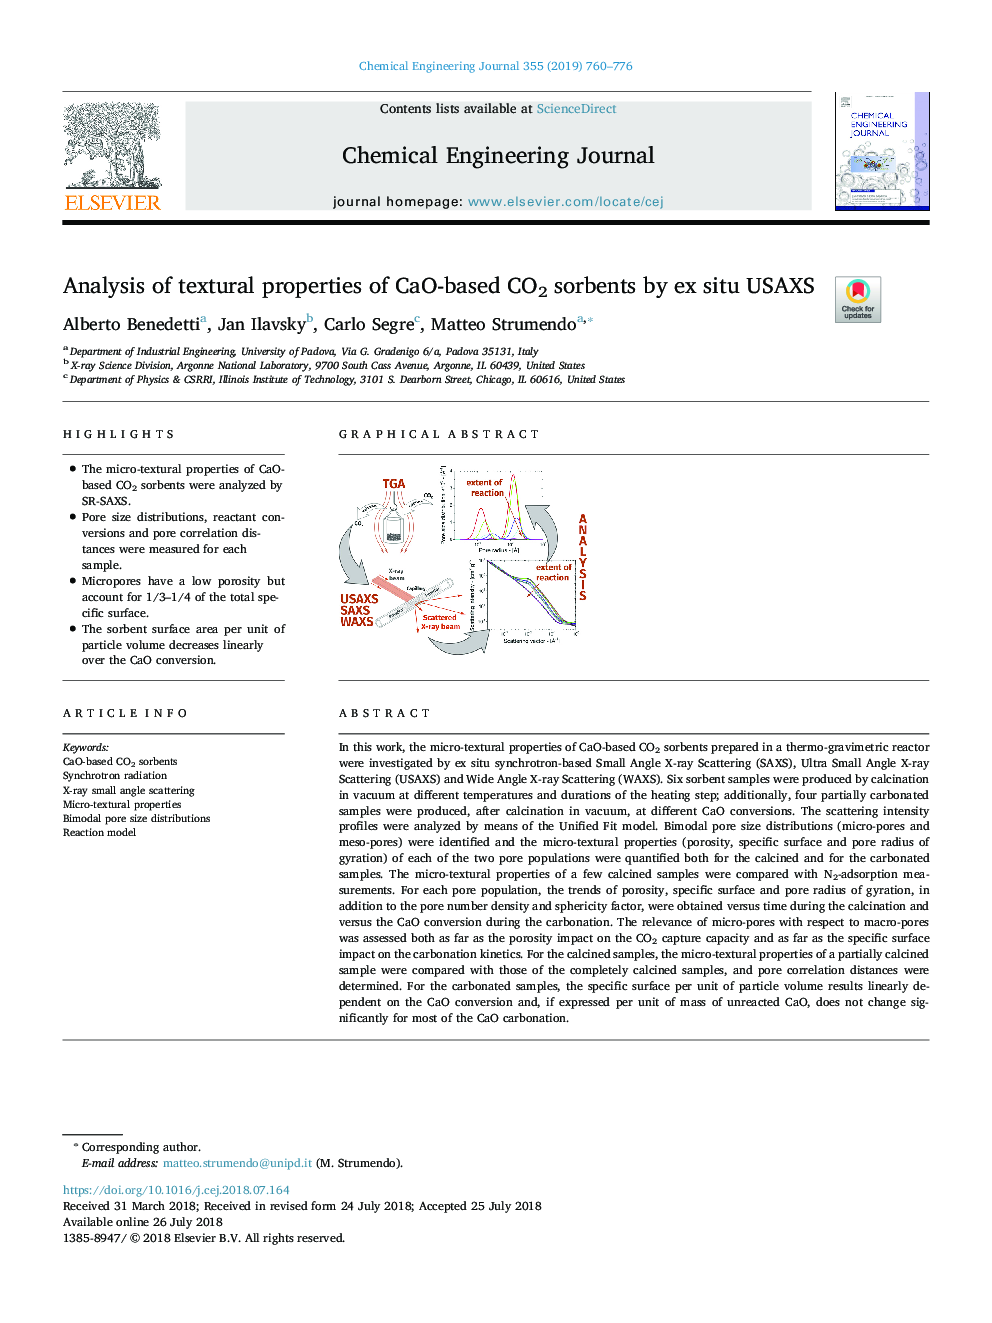 Analysis of textural properties of CaO-based CO2 sorbents by ex situ USAXS